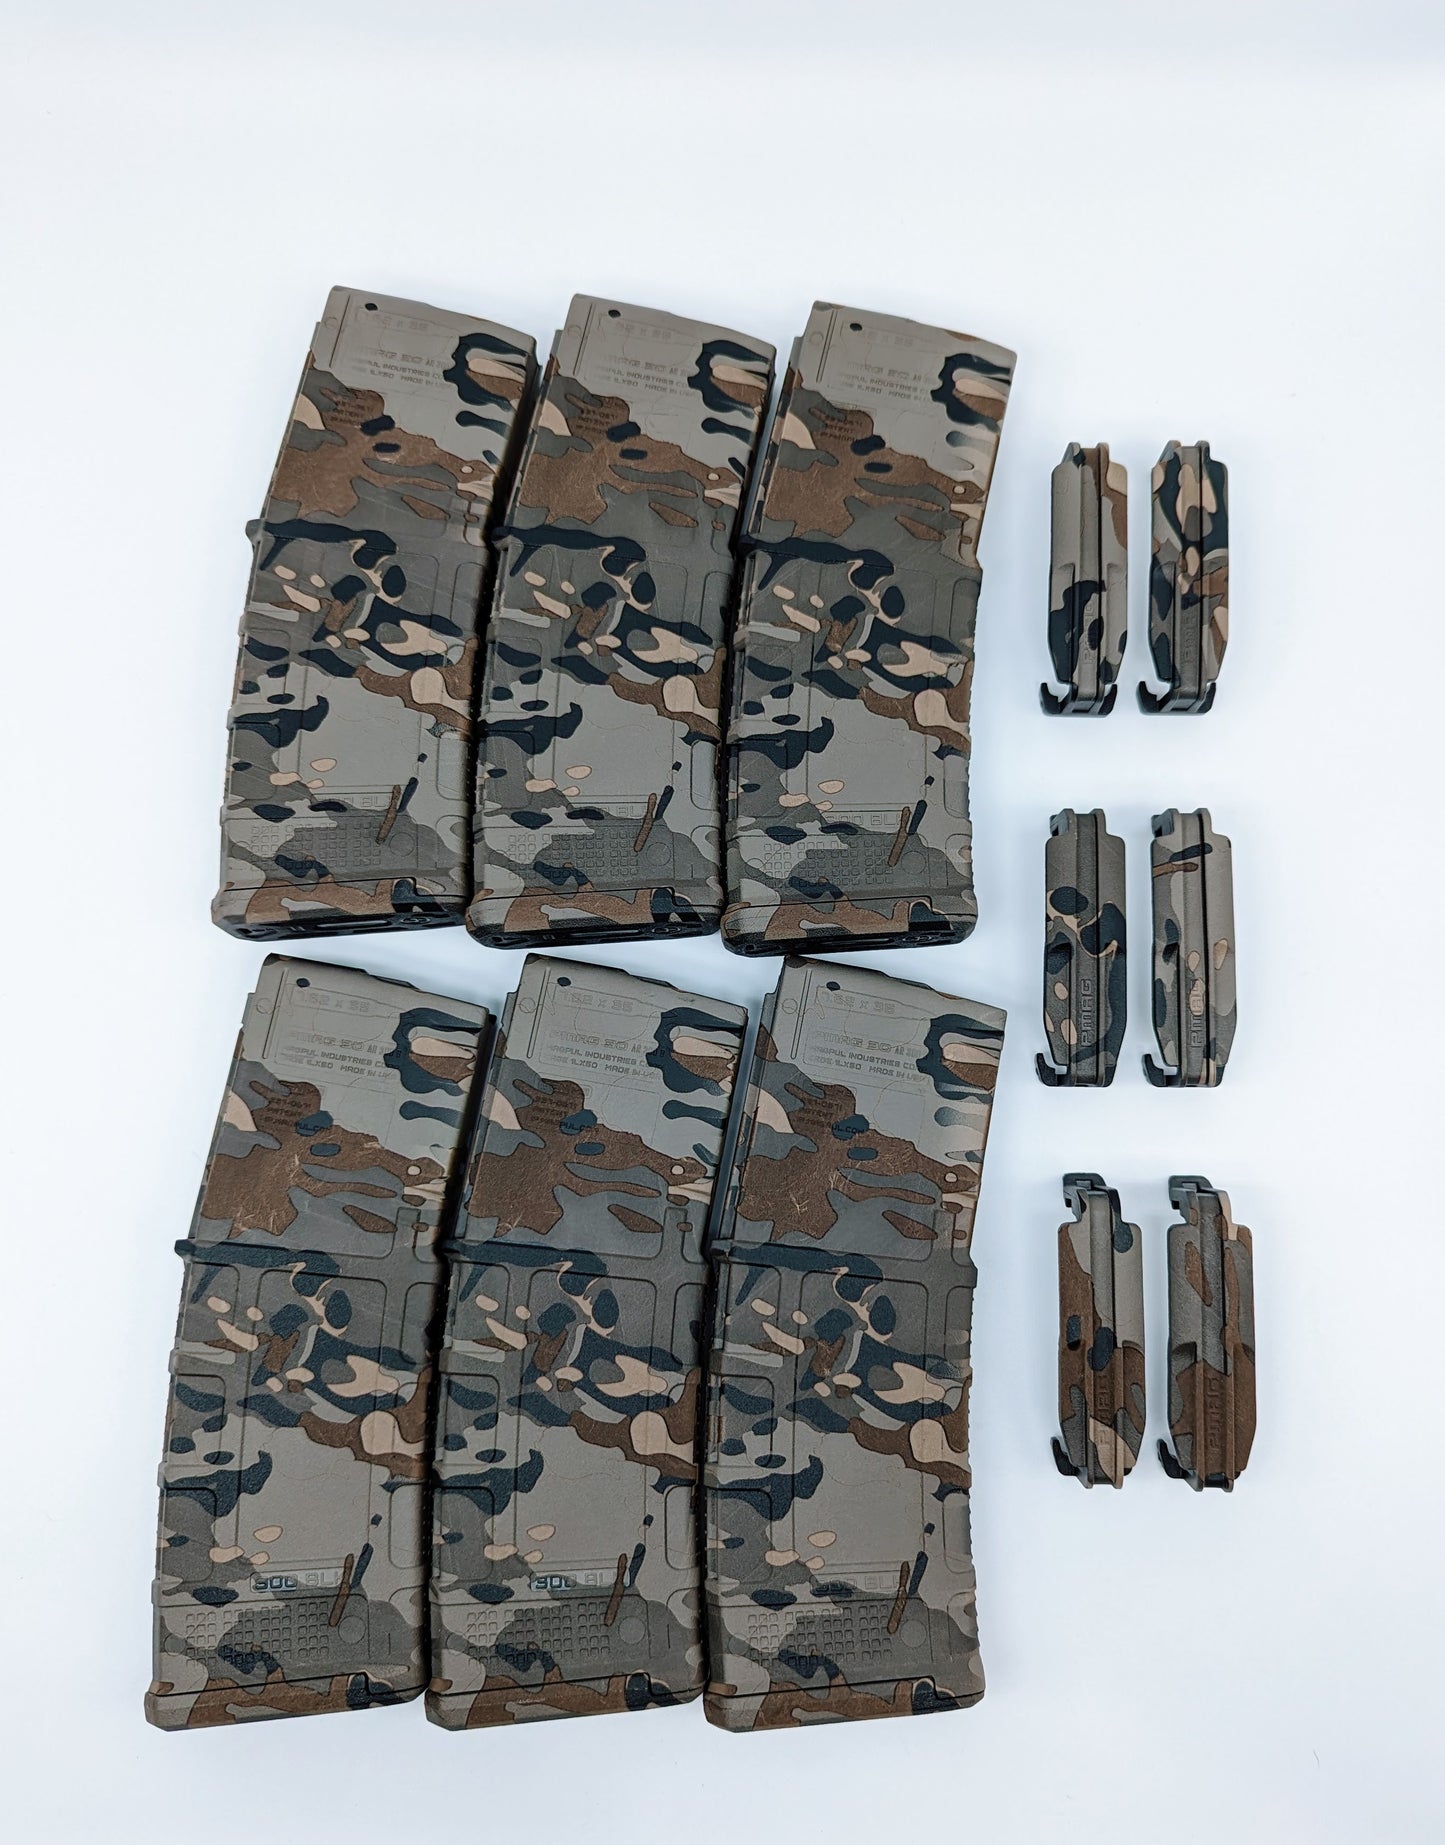 Camo pattern lasered on a PMAG